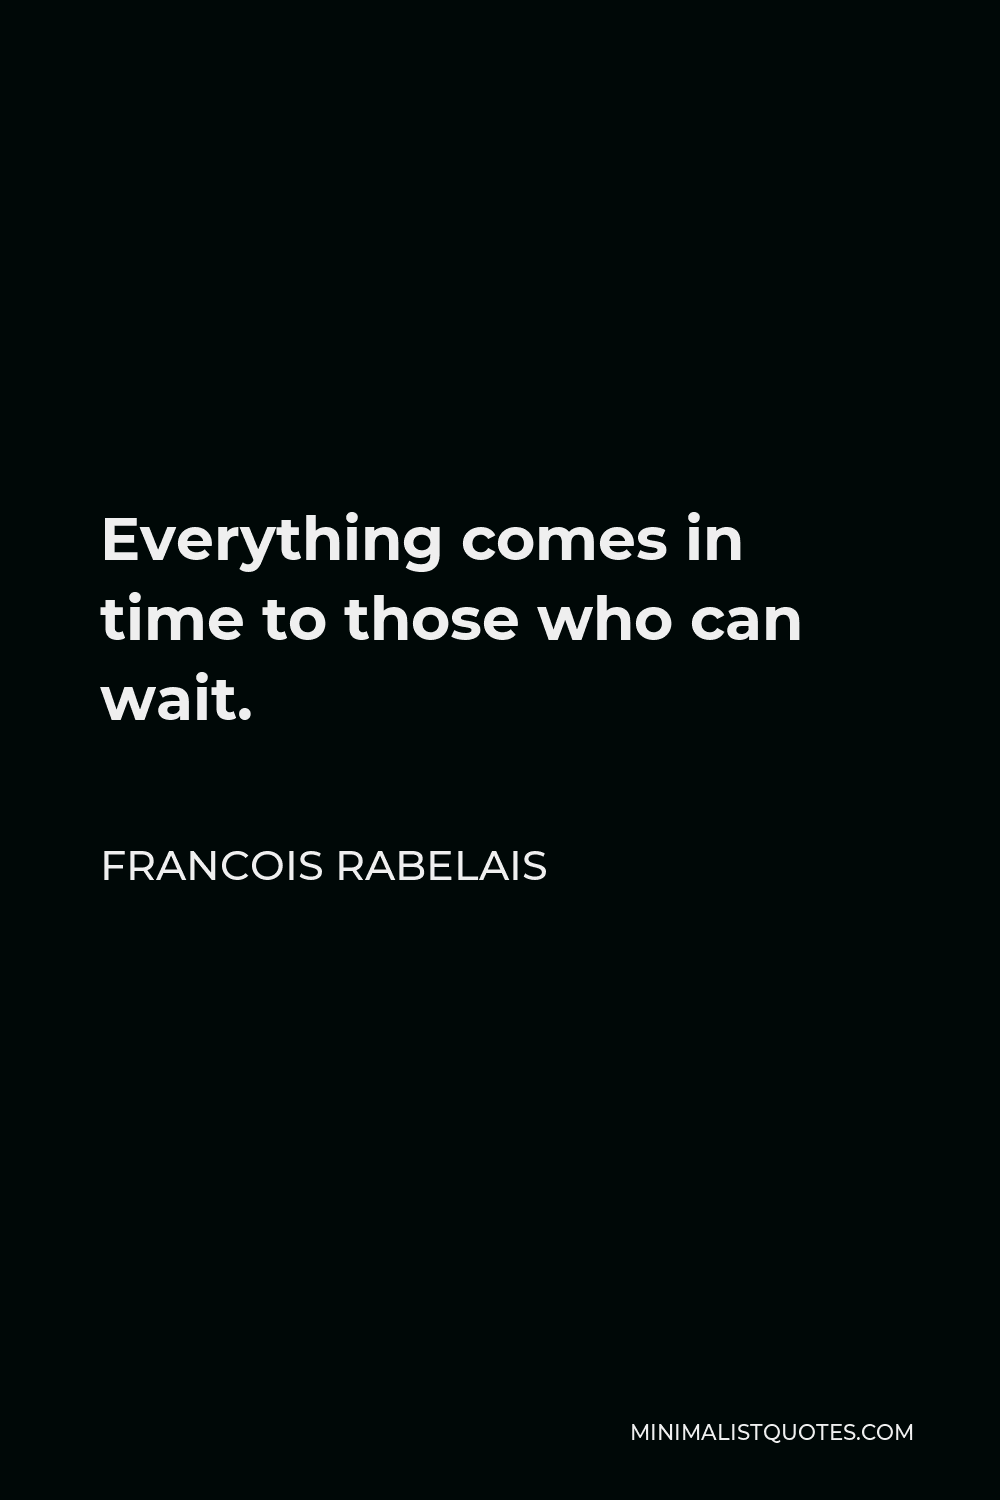 Francois Rabelais Quote - Everything comes in time to those who can wait.